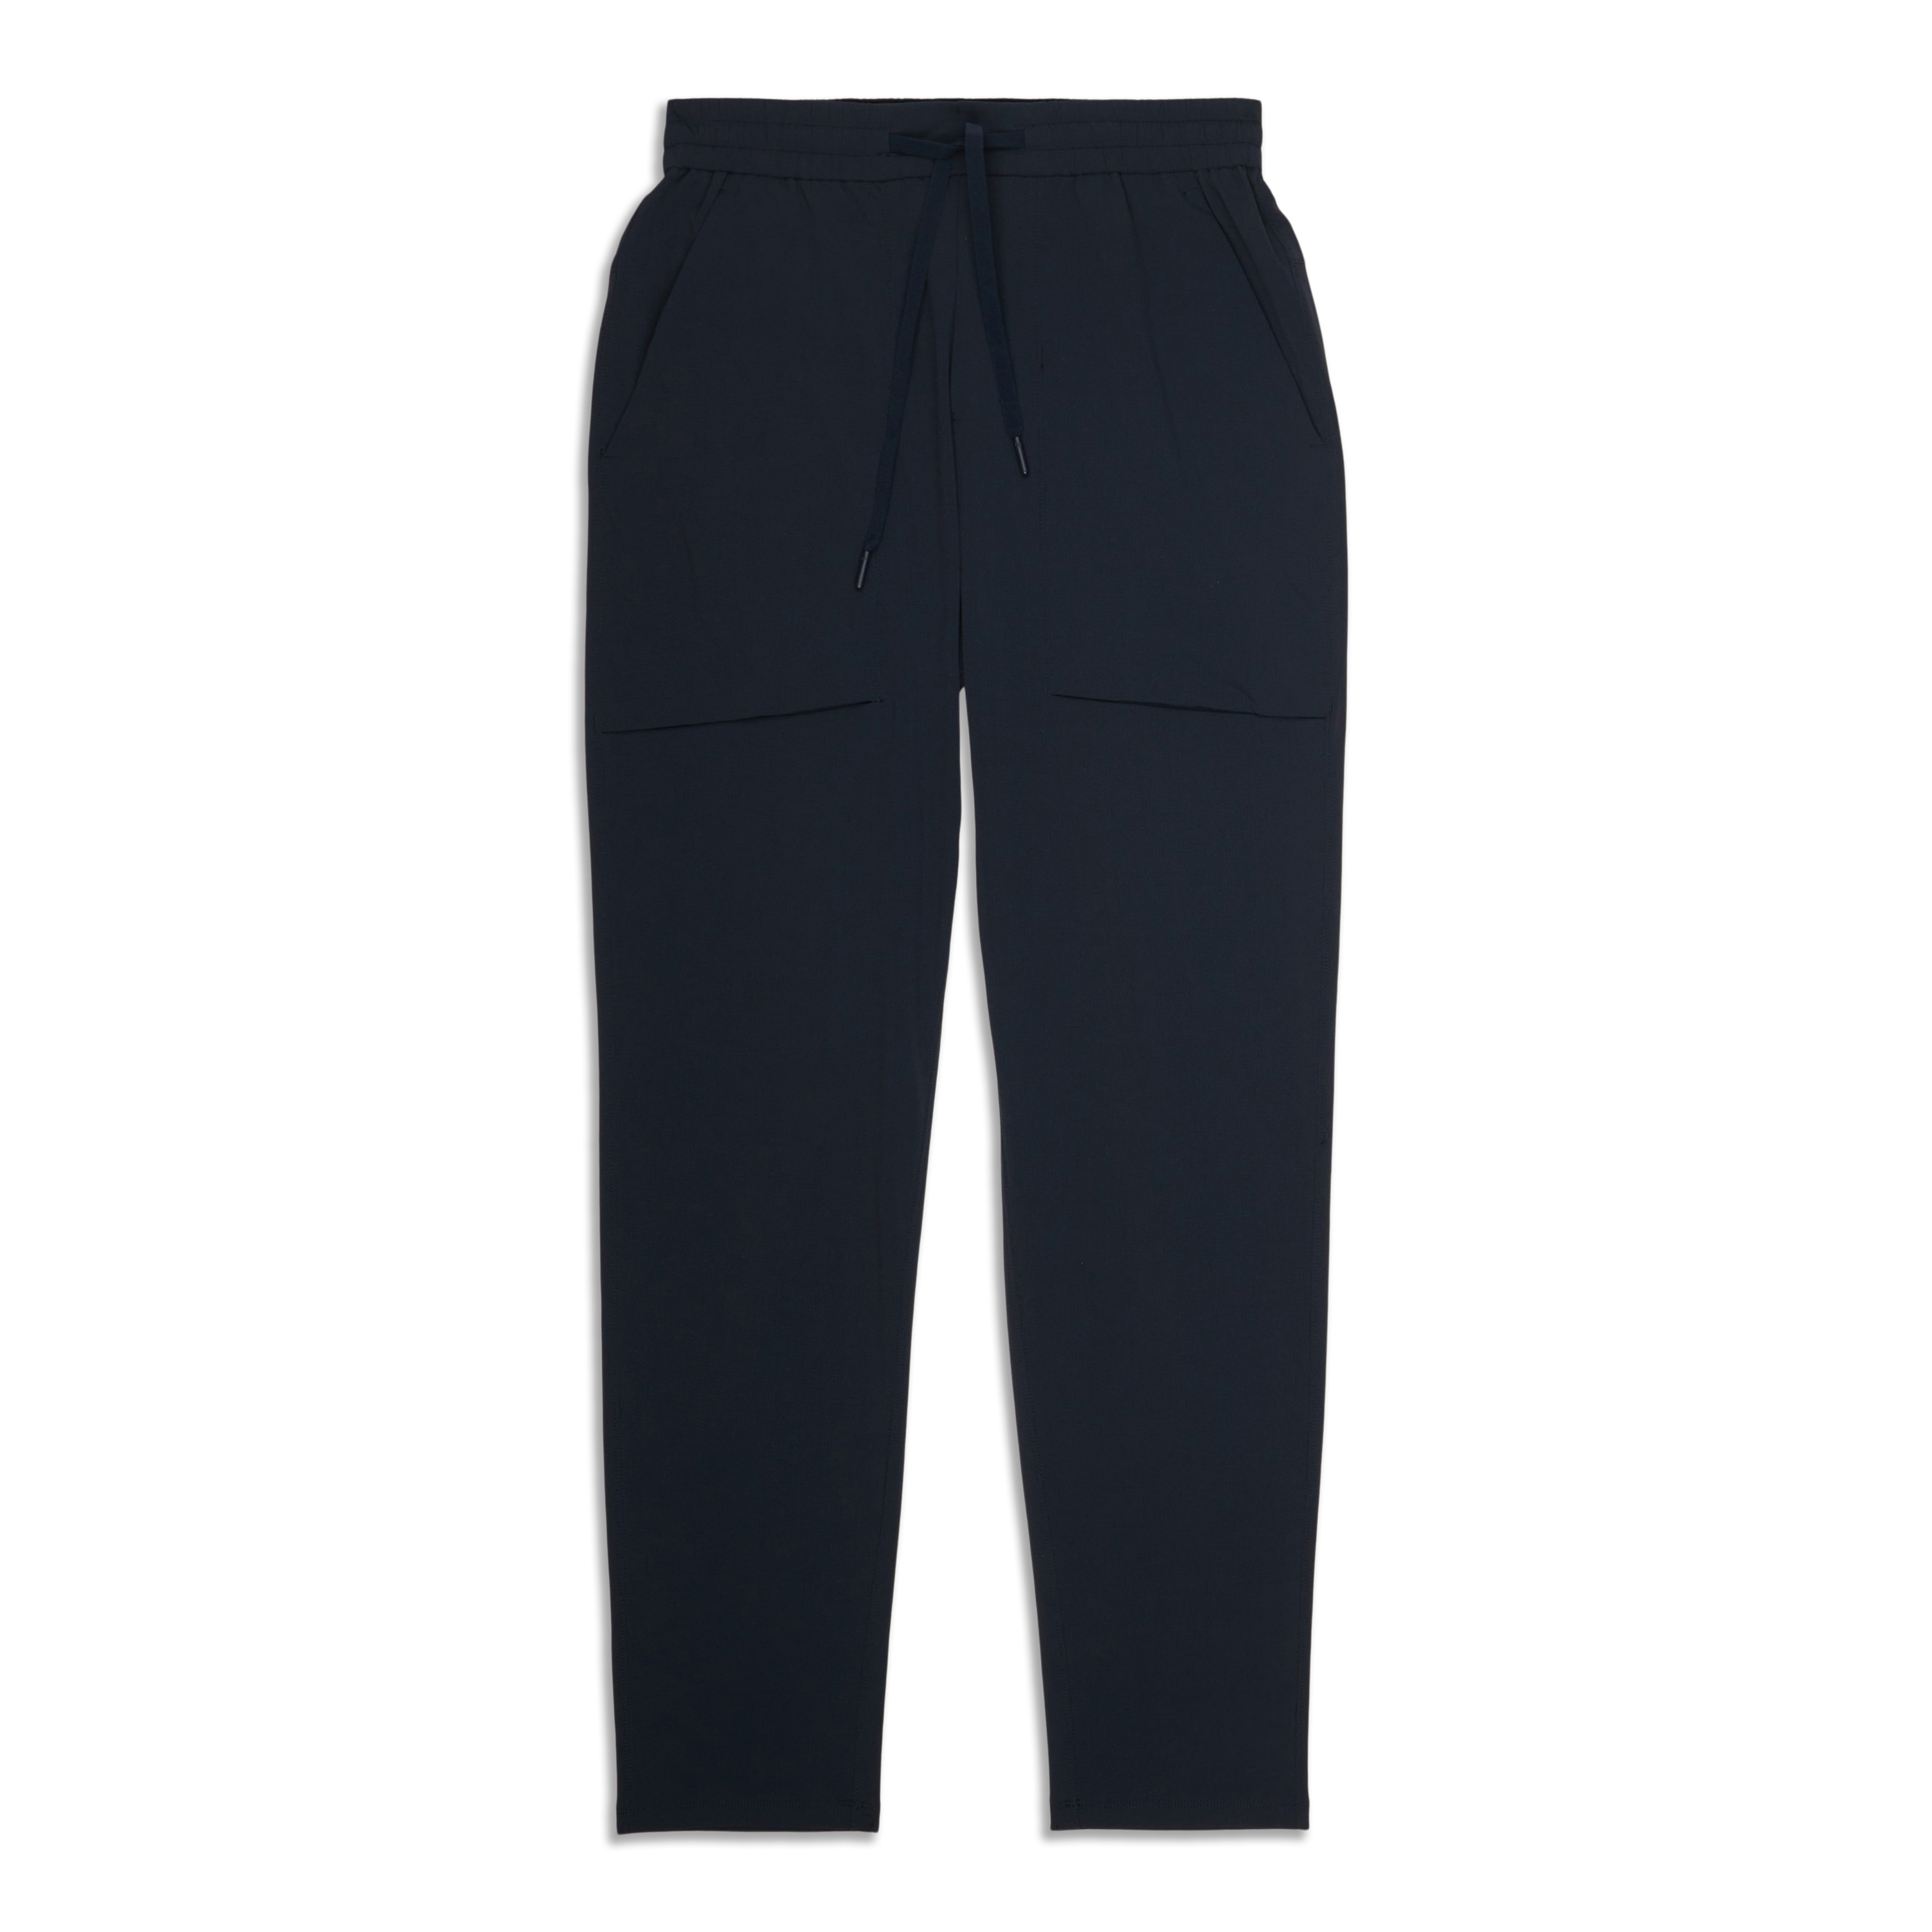 Lululemon Bowline Pant 30 Stretch Ripstop *Online Only - 133025133